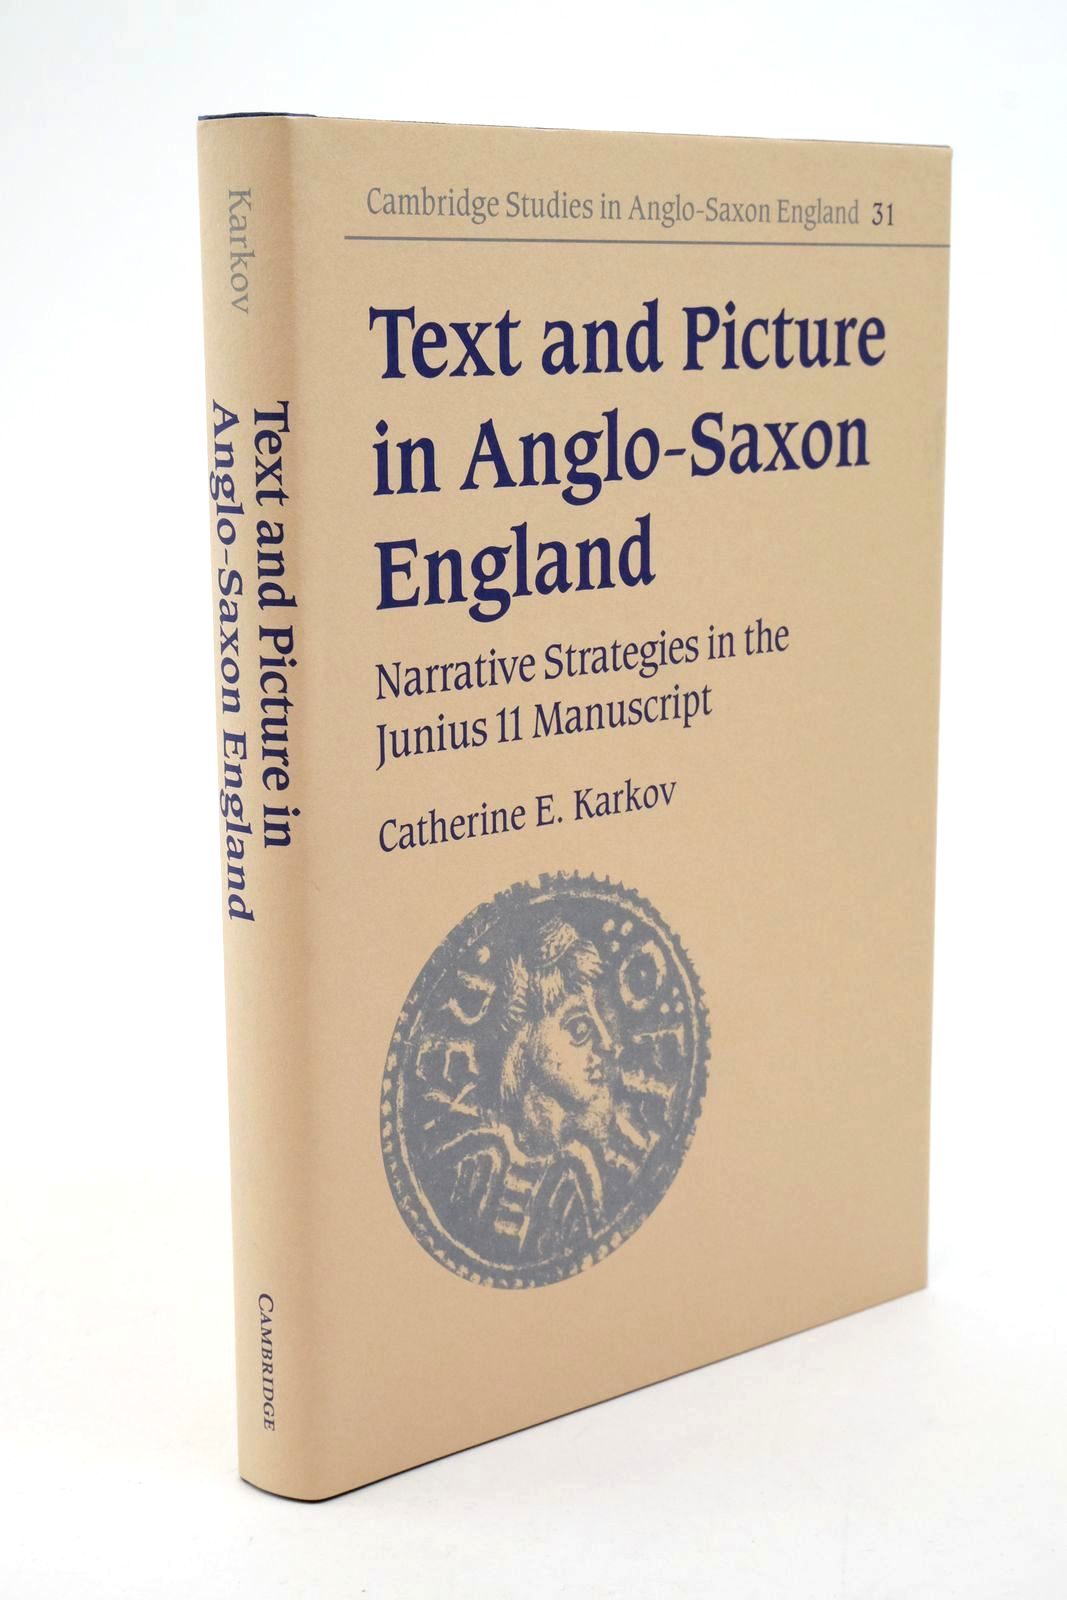 Photo of TEXT AND PICTURE IN ANGLO-SAXON ENGLAND written by Karkov, Catherine E. published by Cambridge University Press (STOCK CODE: 1322651)  for sale by Stella & Rose's Books